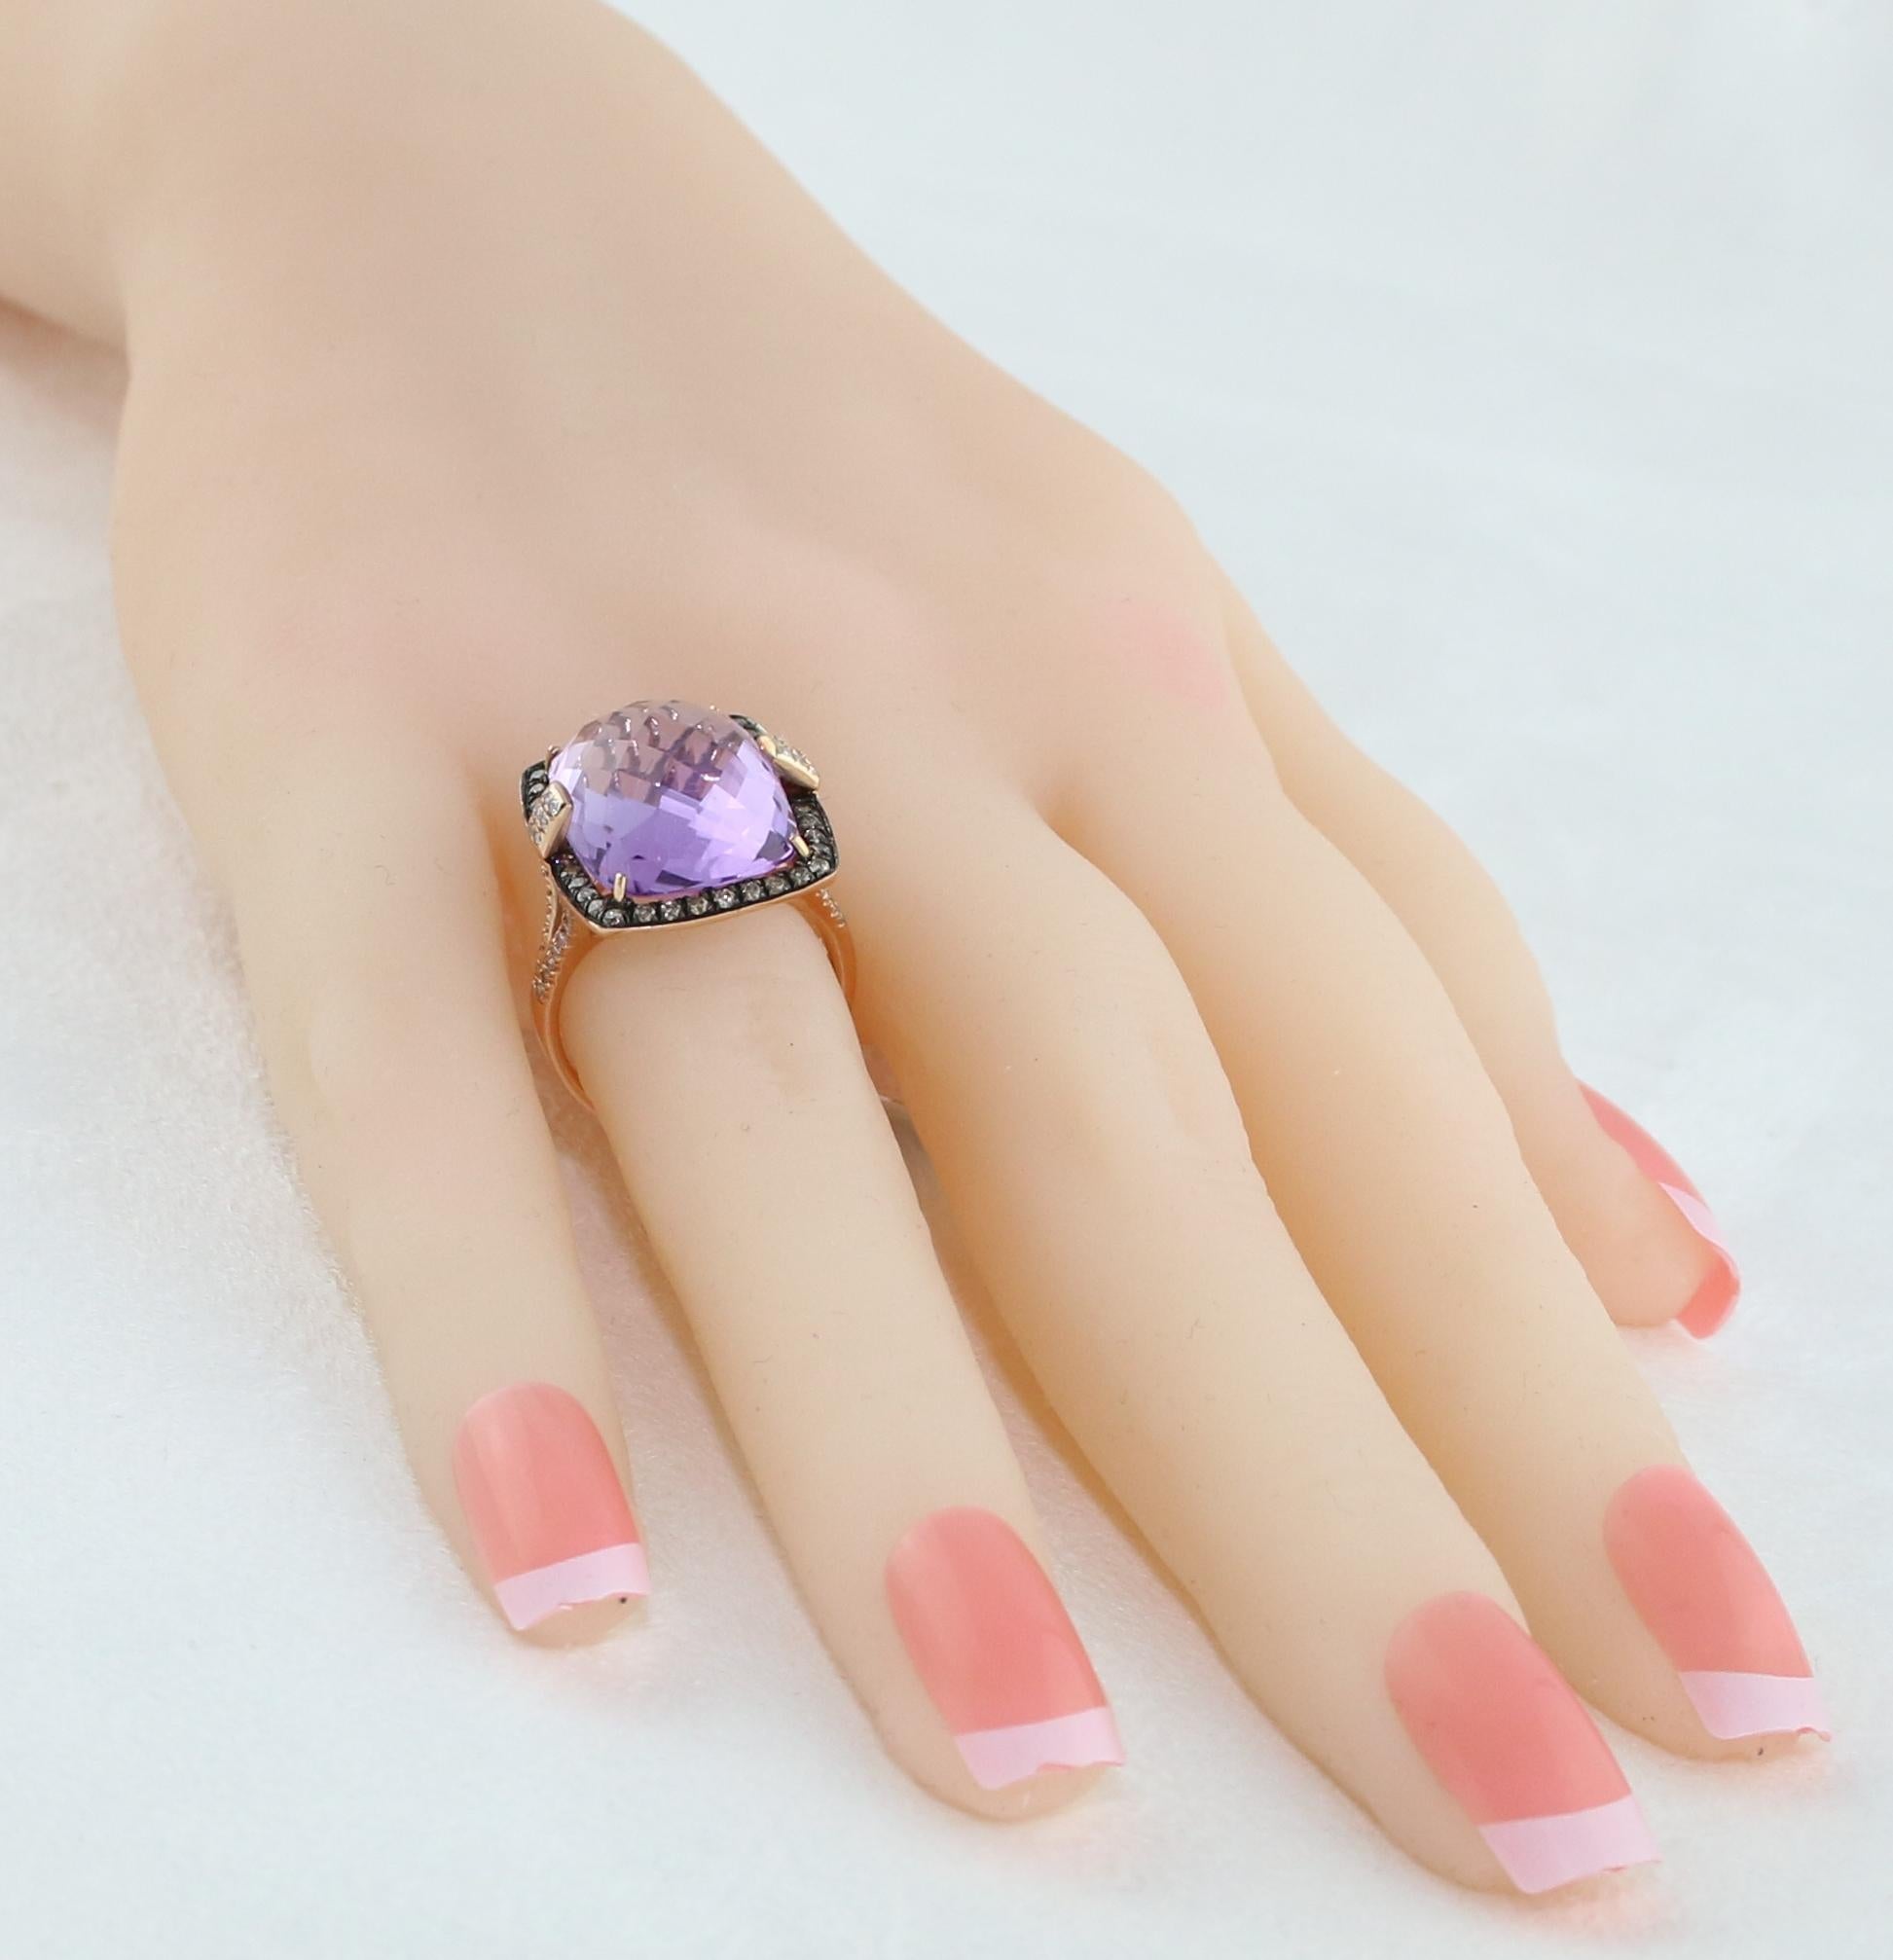 13.93 Carat Radiant Checkerboard Cut Amethyst Diamond Gold Ring For Sale 1